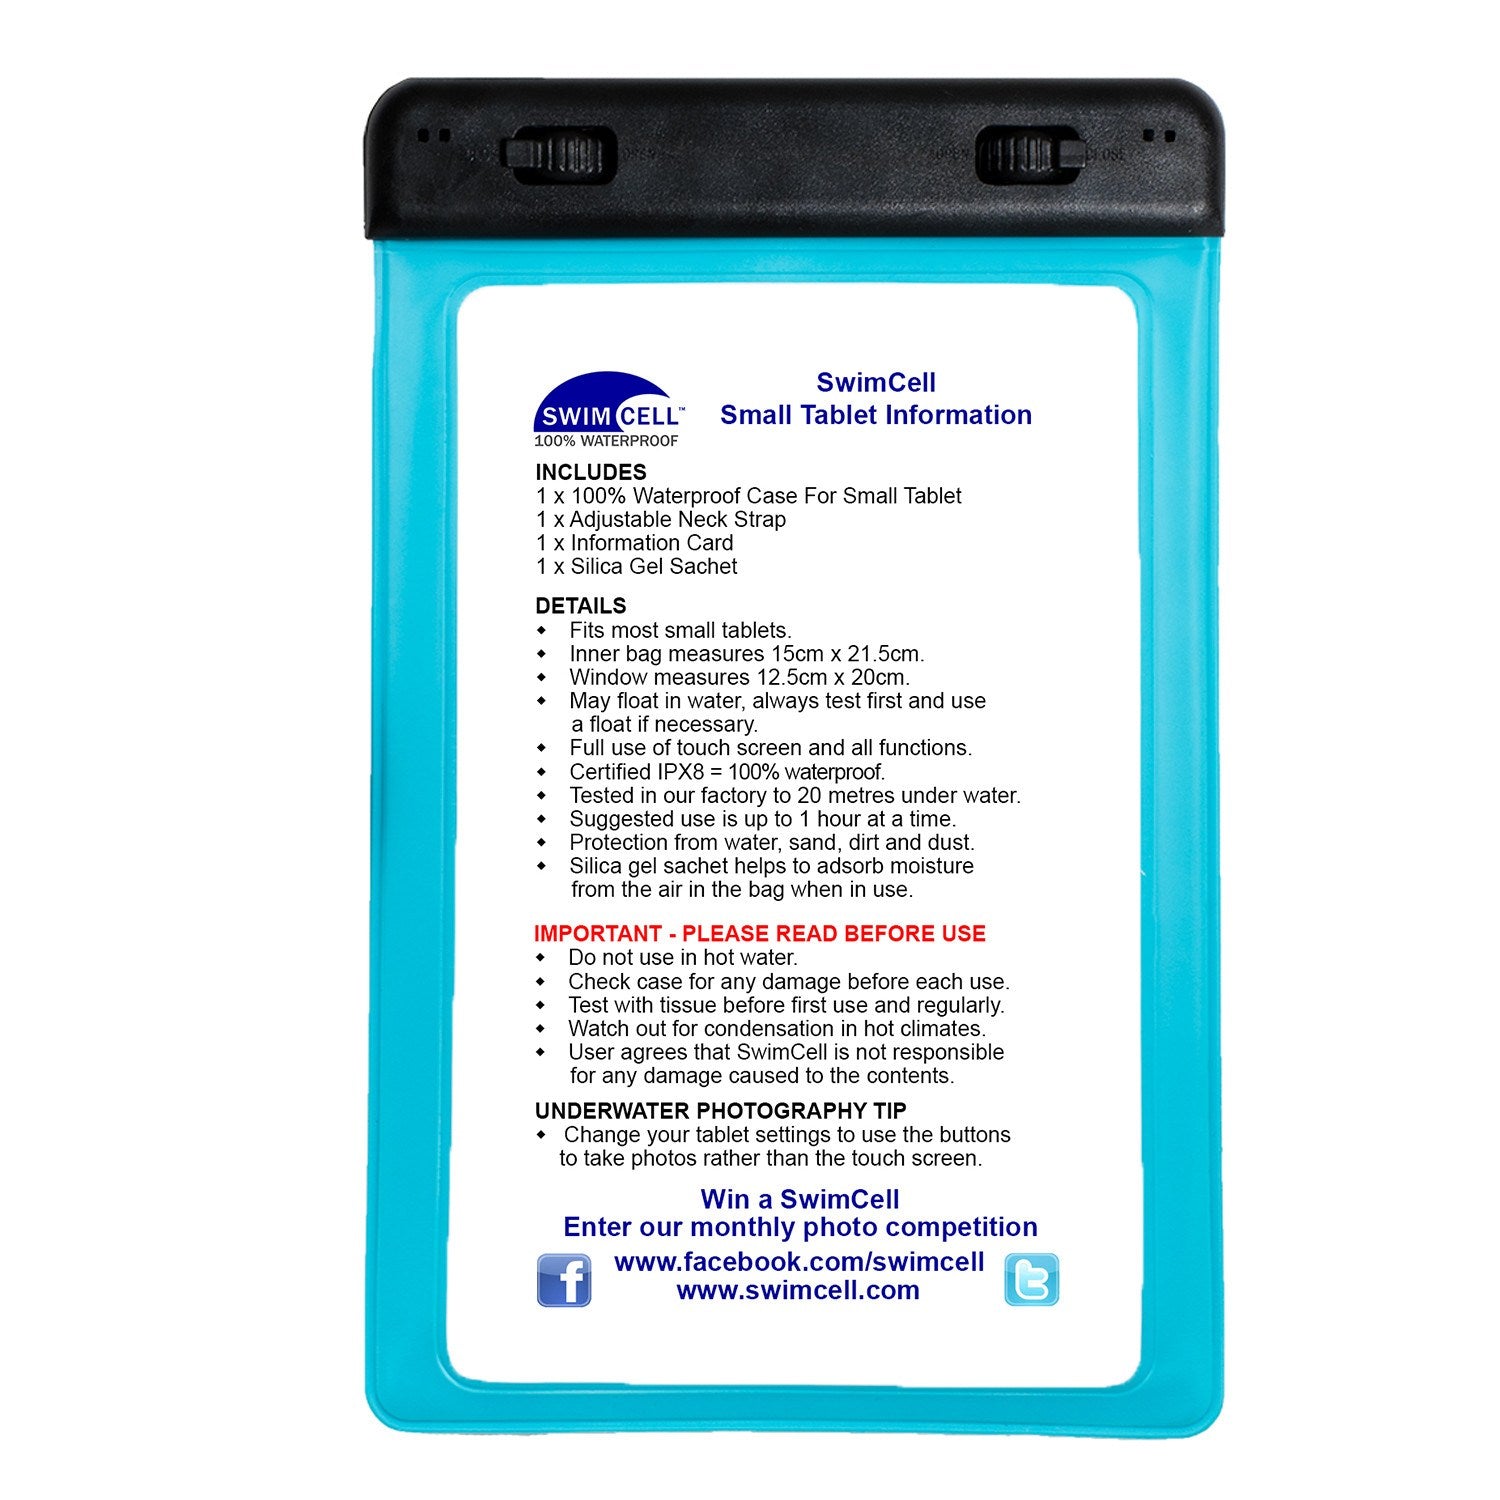 SwimCell Small Blue Tablet waterproof case with instructions